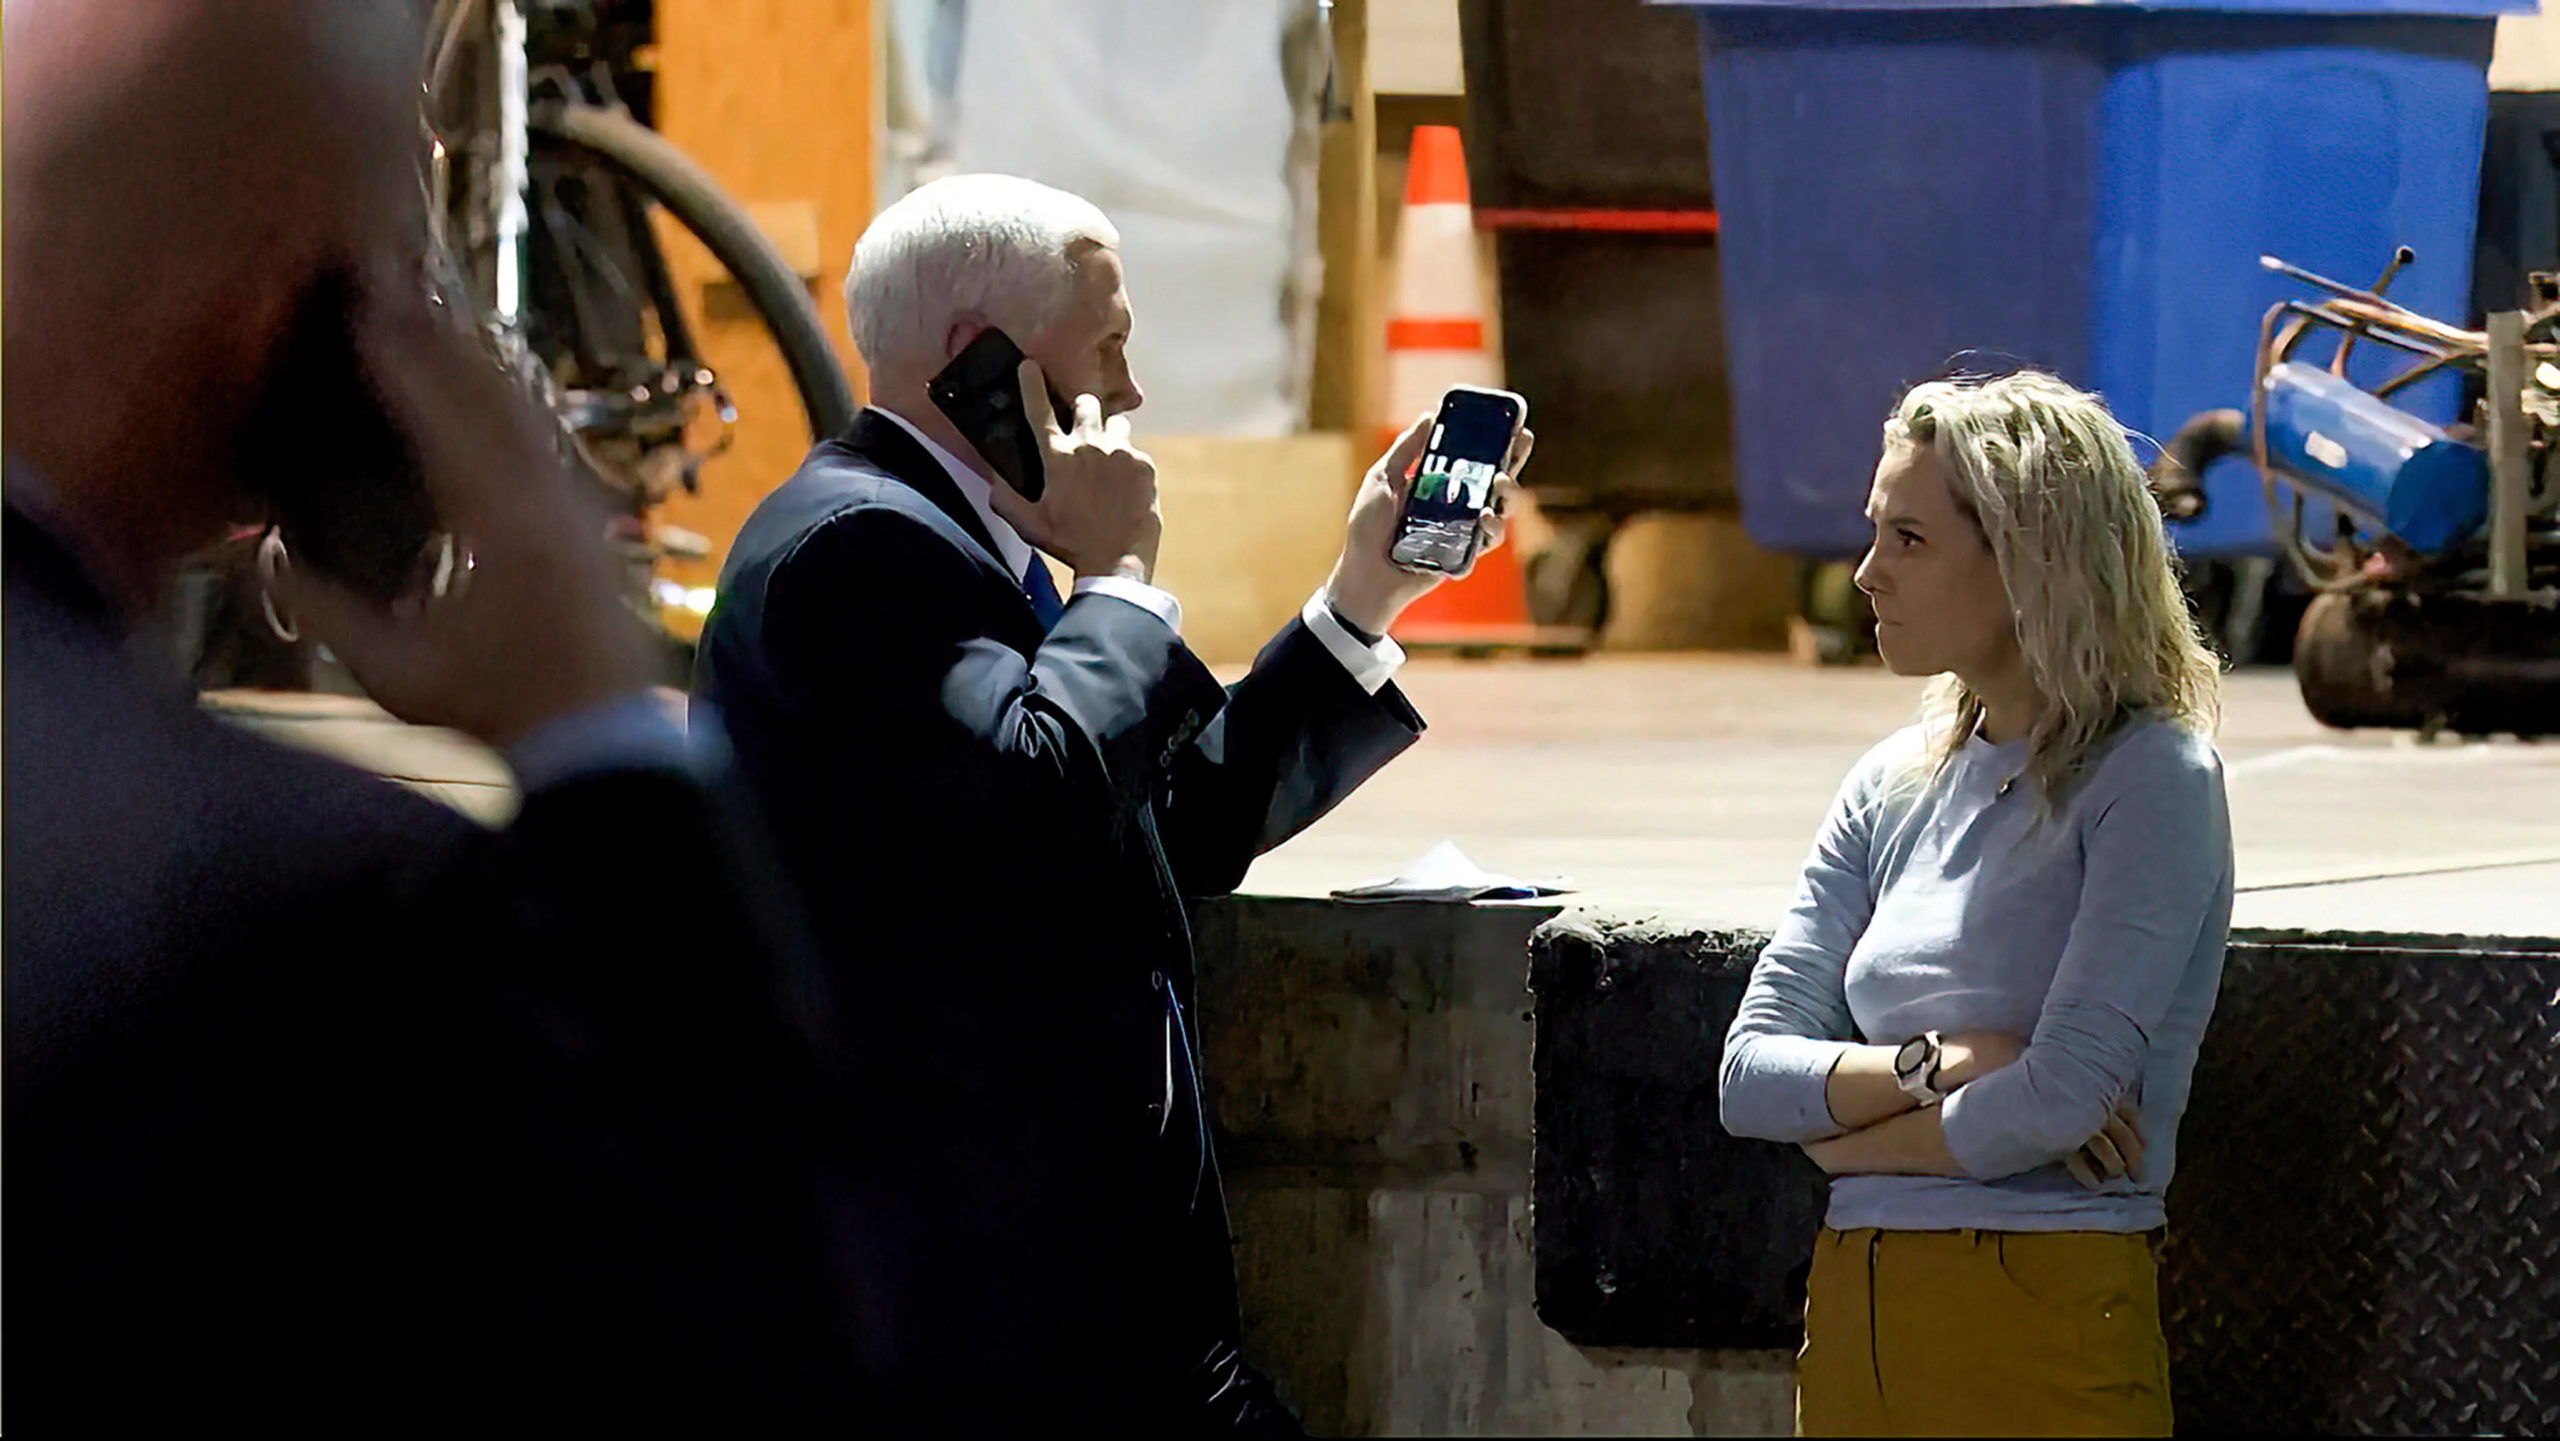 Chatting the Pictures: The Pence Jan. 6 Photos and the Hero Narrative